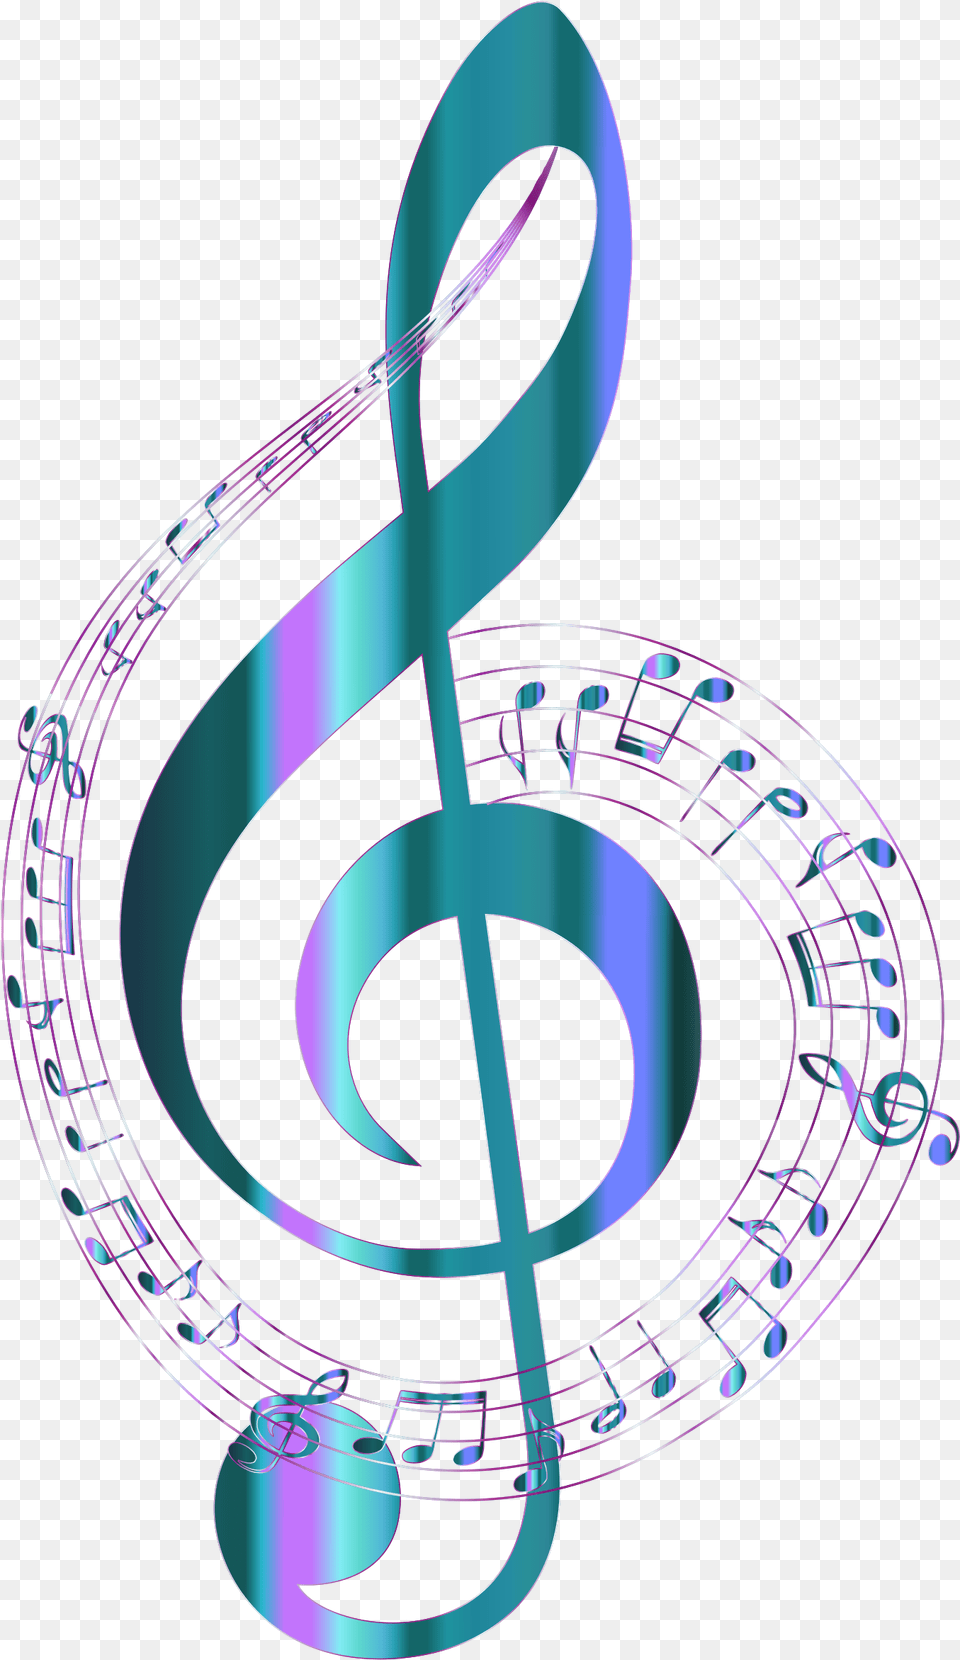 Turquoise Musical Notes Typography No Background By Gdj Transparent Background Music Note, Art, Graphics, Smoke Pipe, Symbol Png